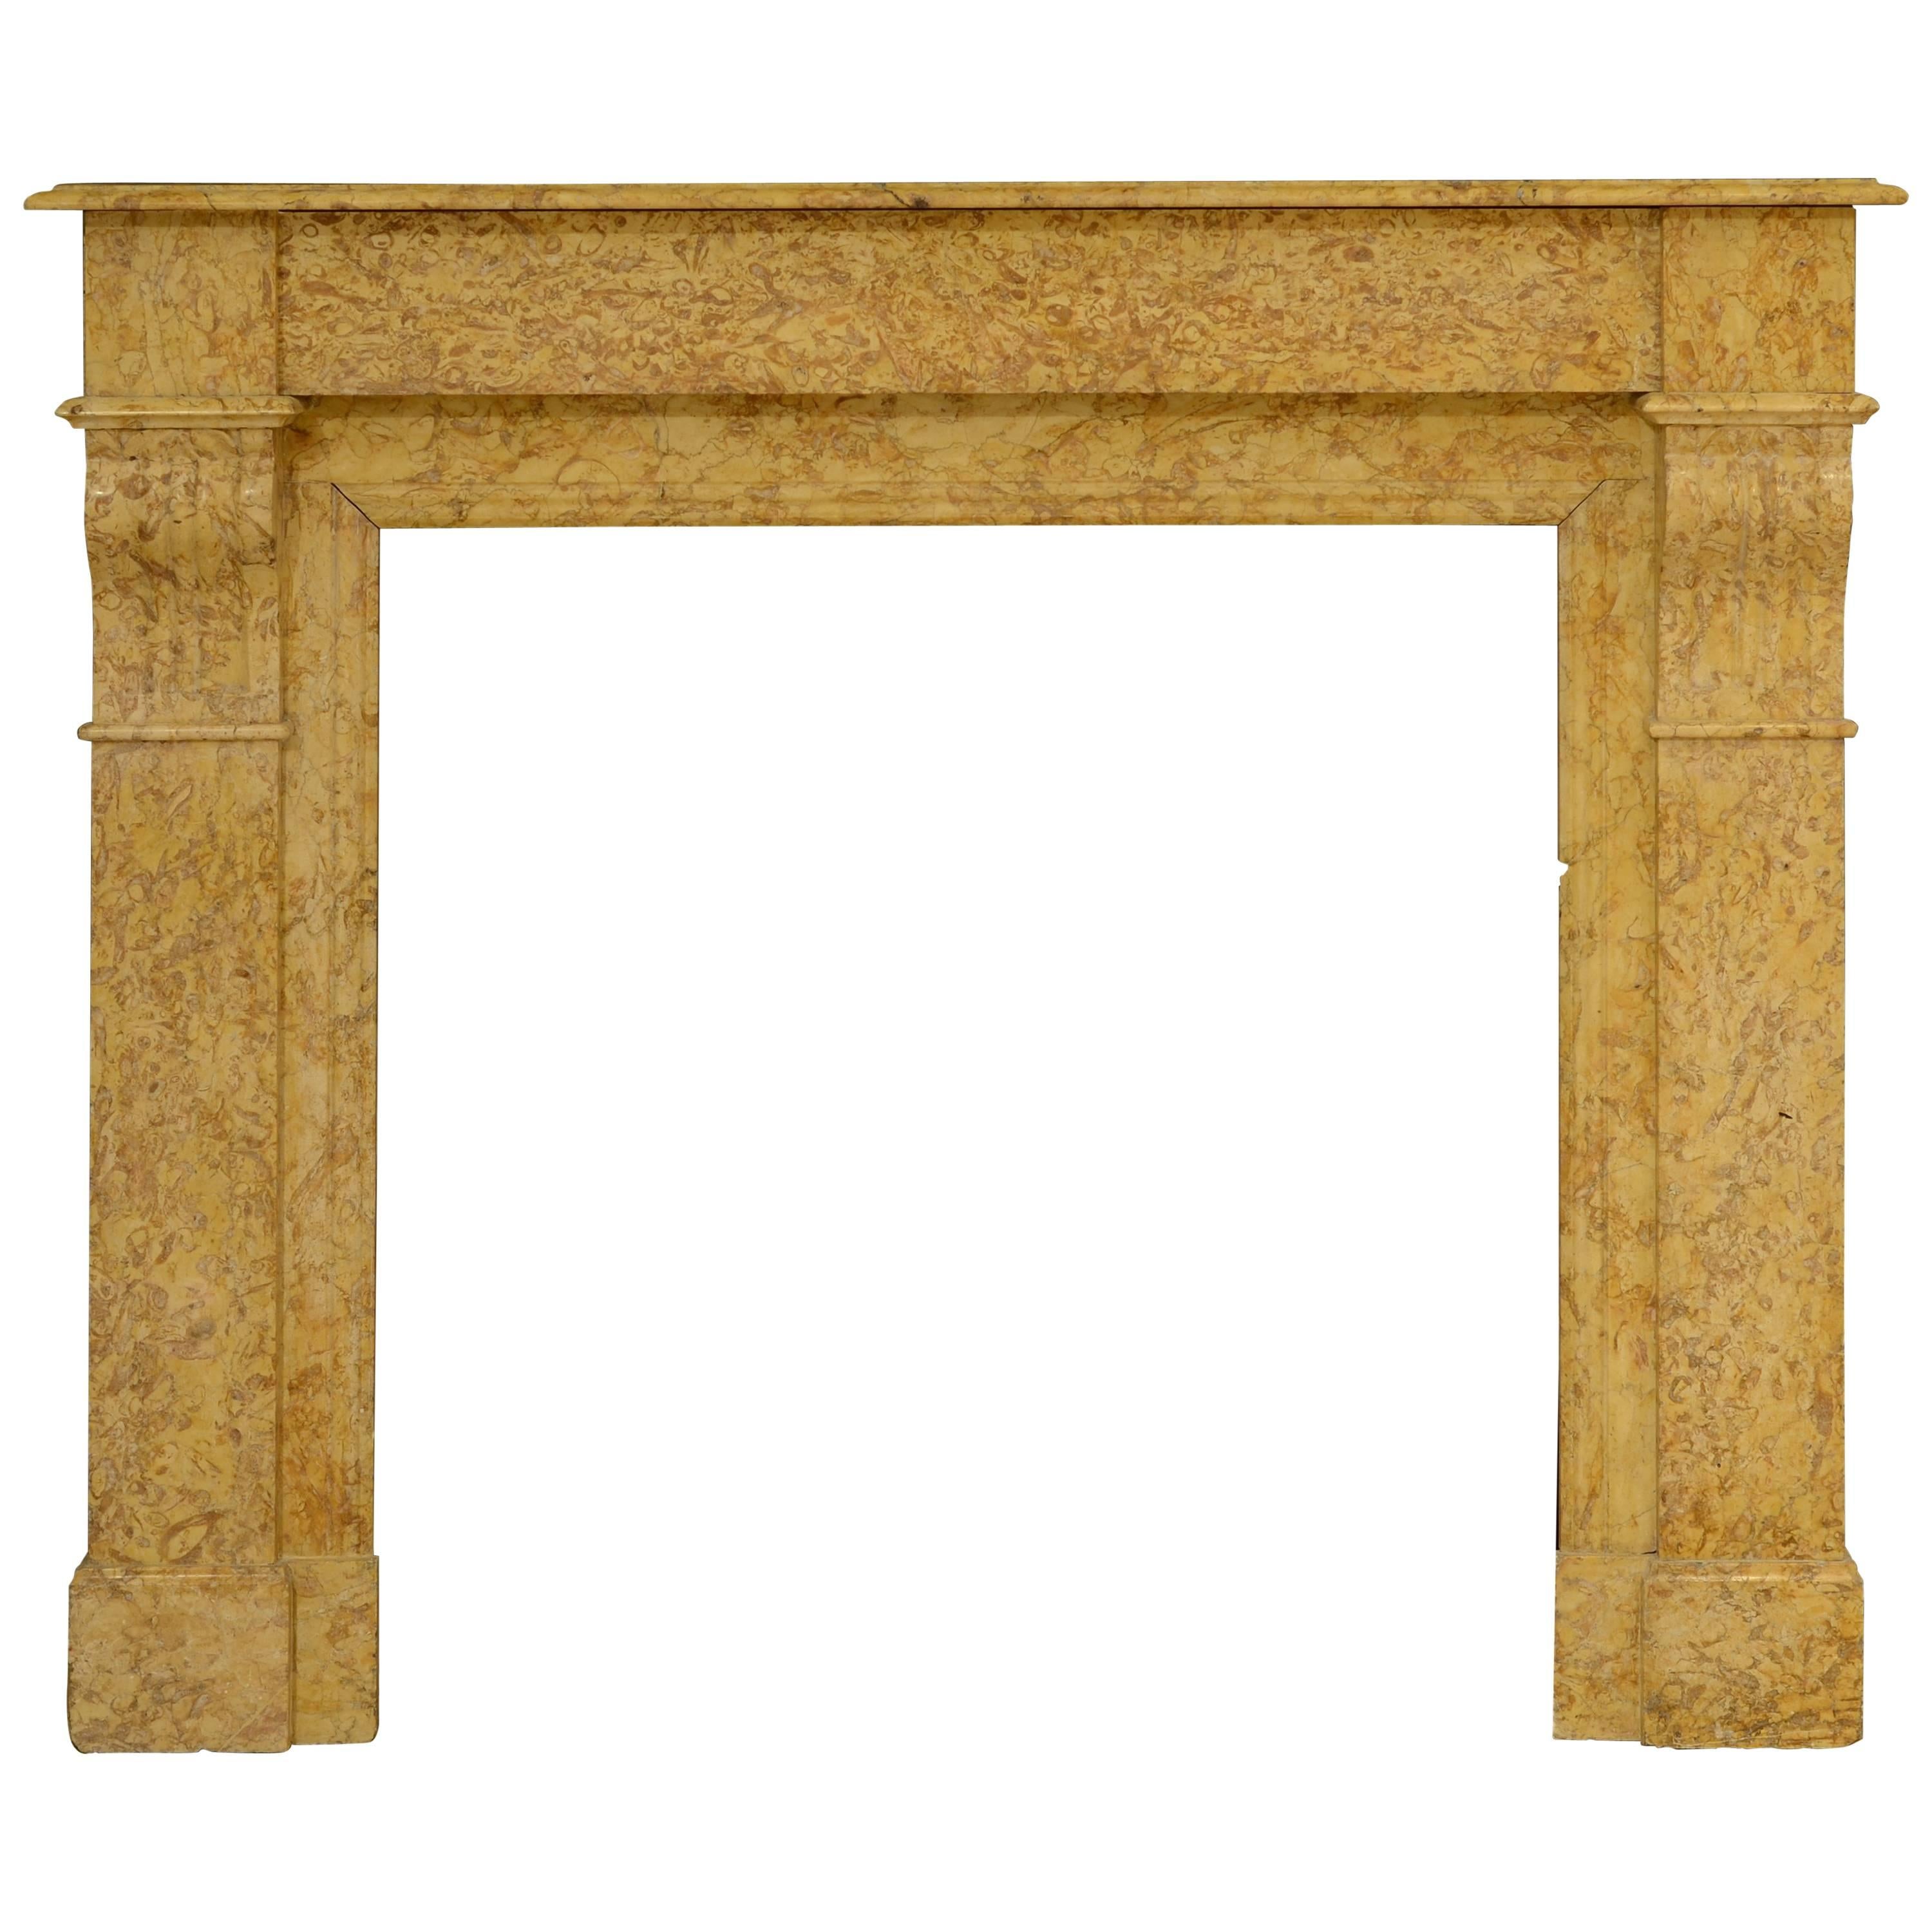 Antique Fireplace in Beautiful Yellow Brocatelle Marble